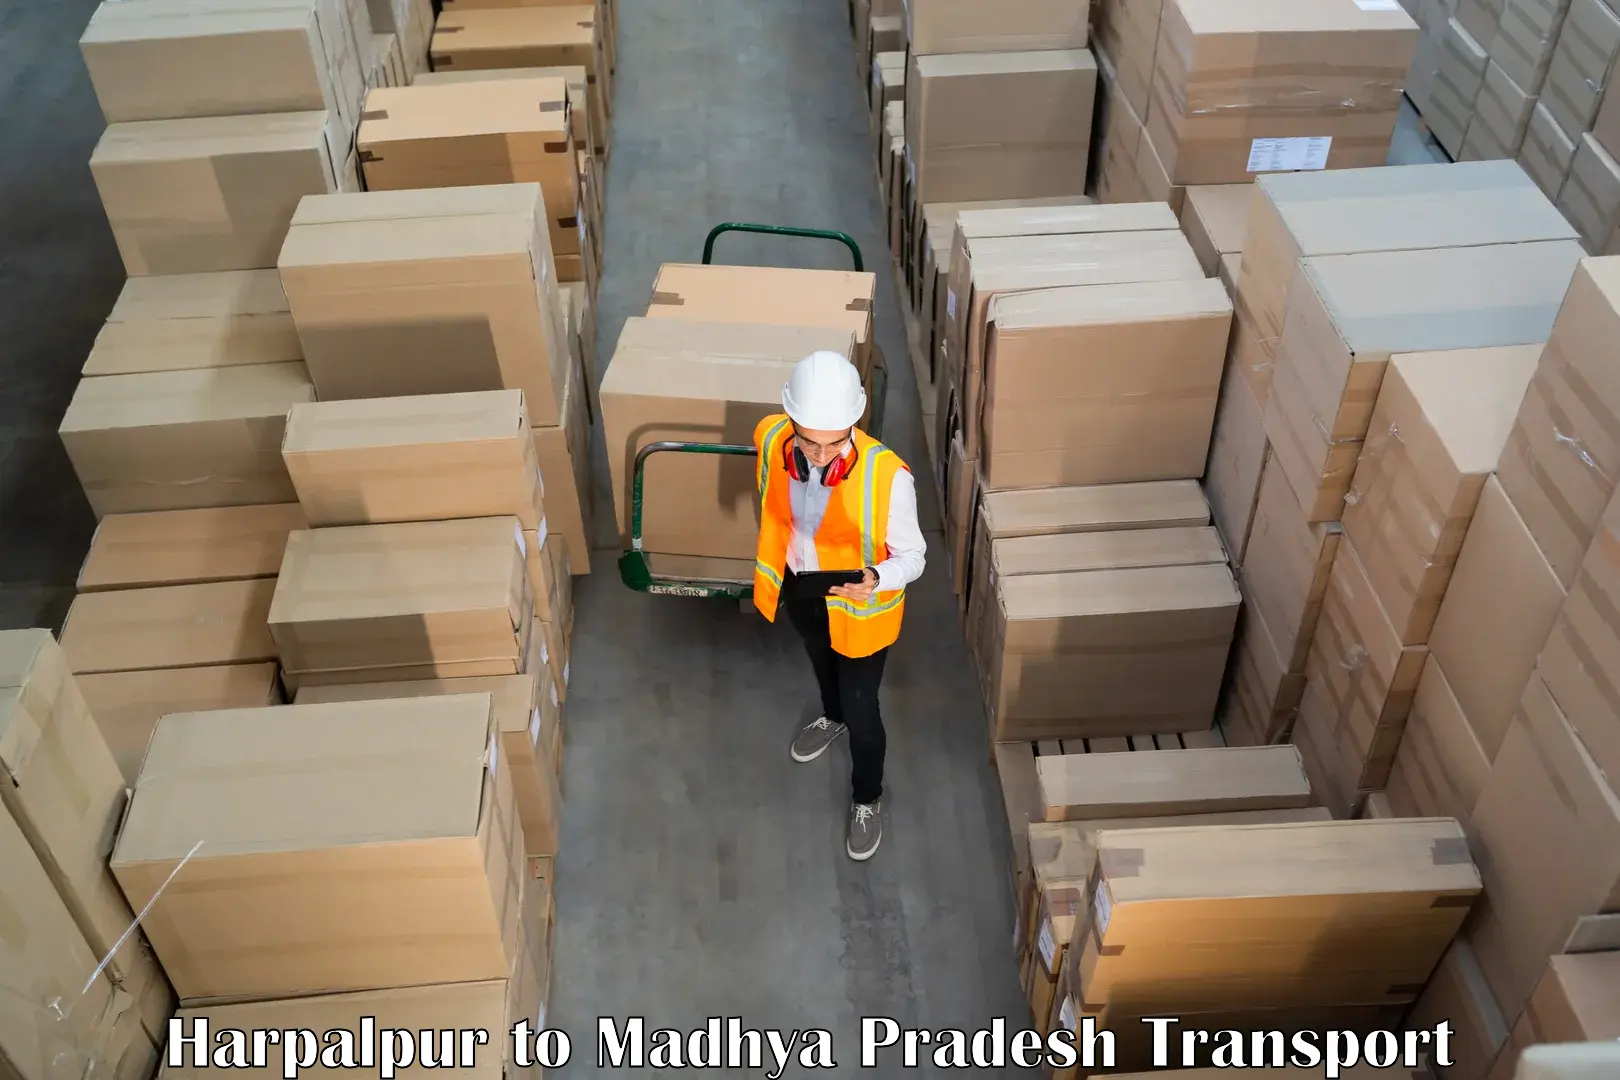 Goods delivery service Harpalpur to Kesali